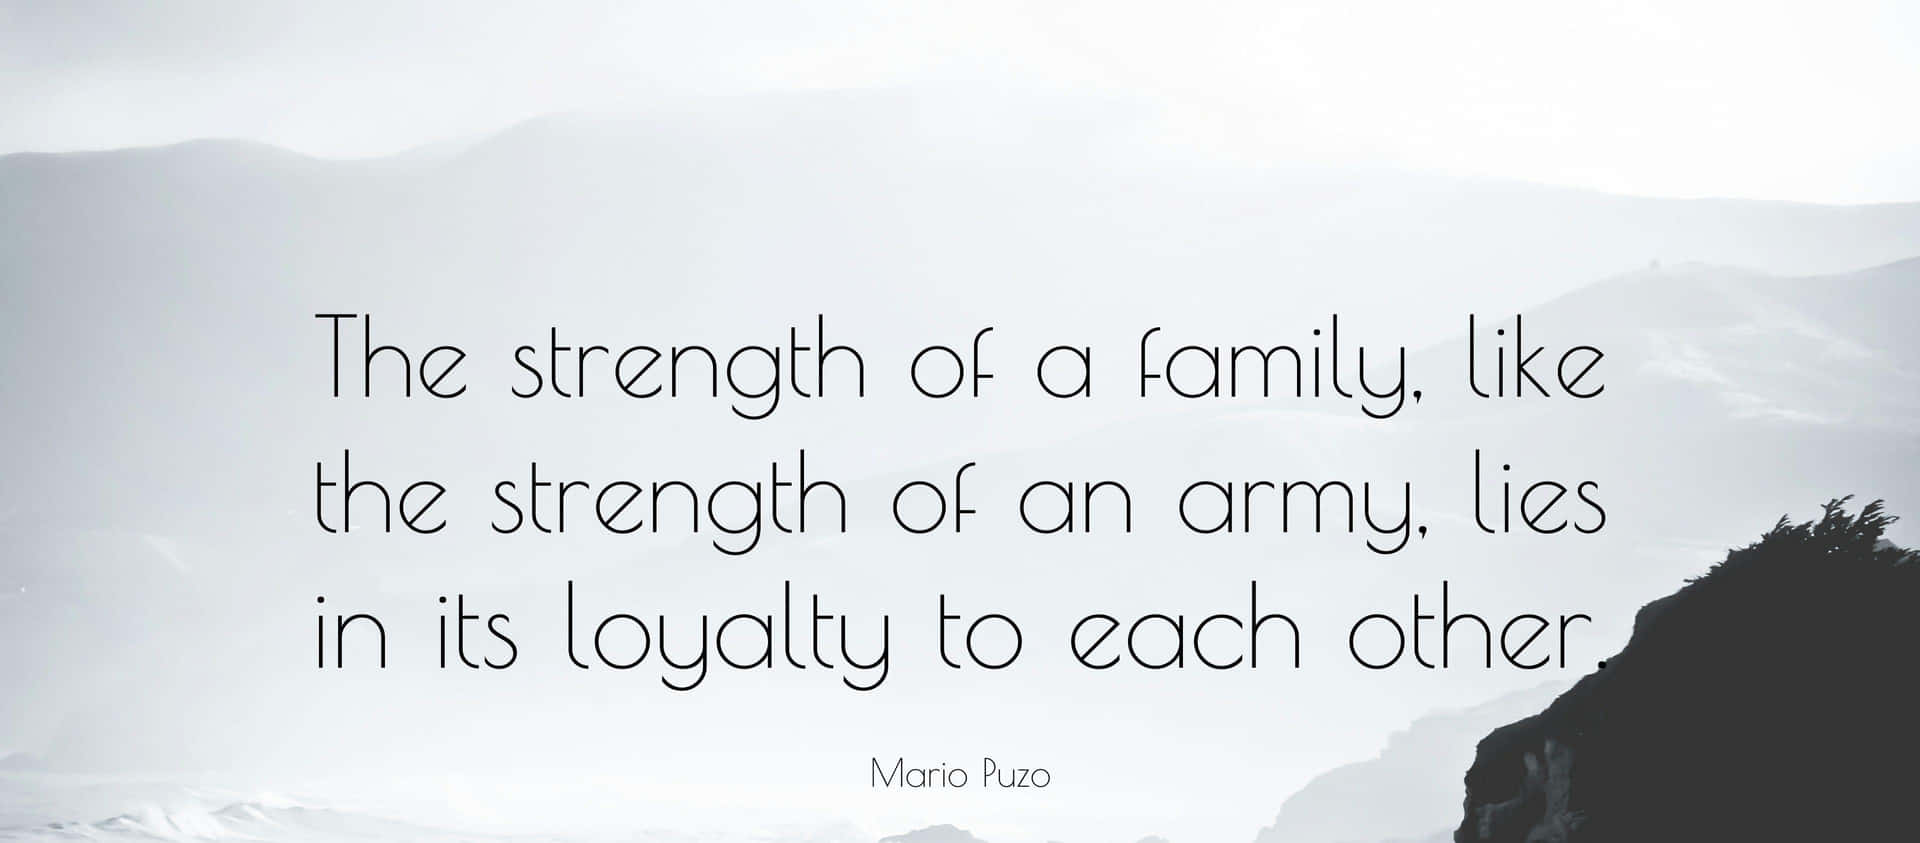 Family Strength Loyalty Quote Wallpaper